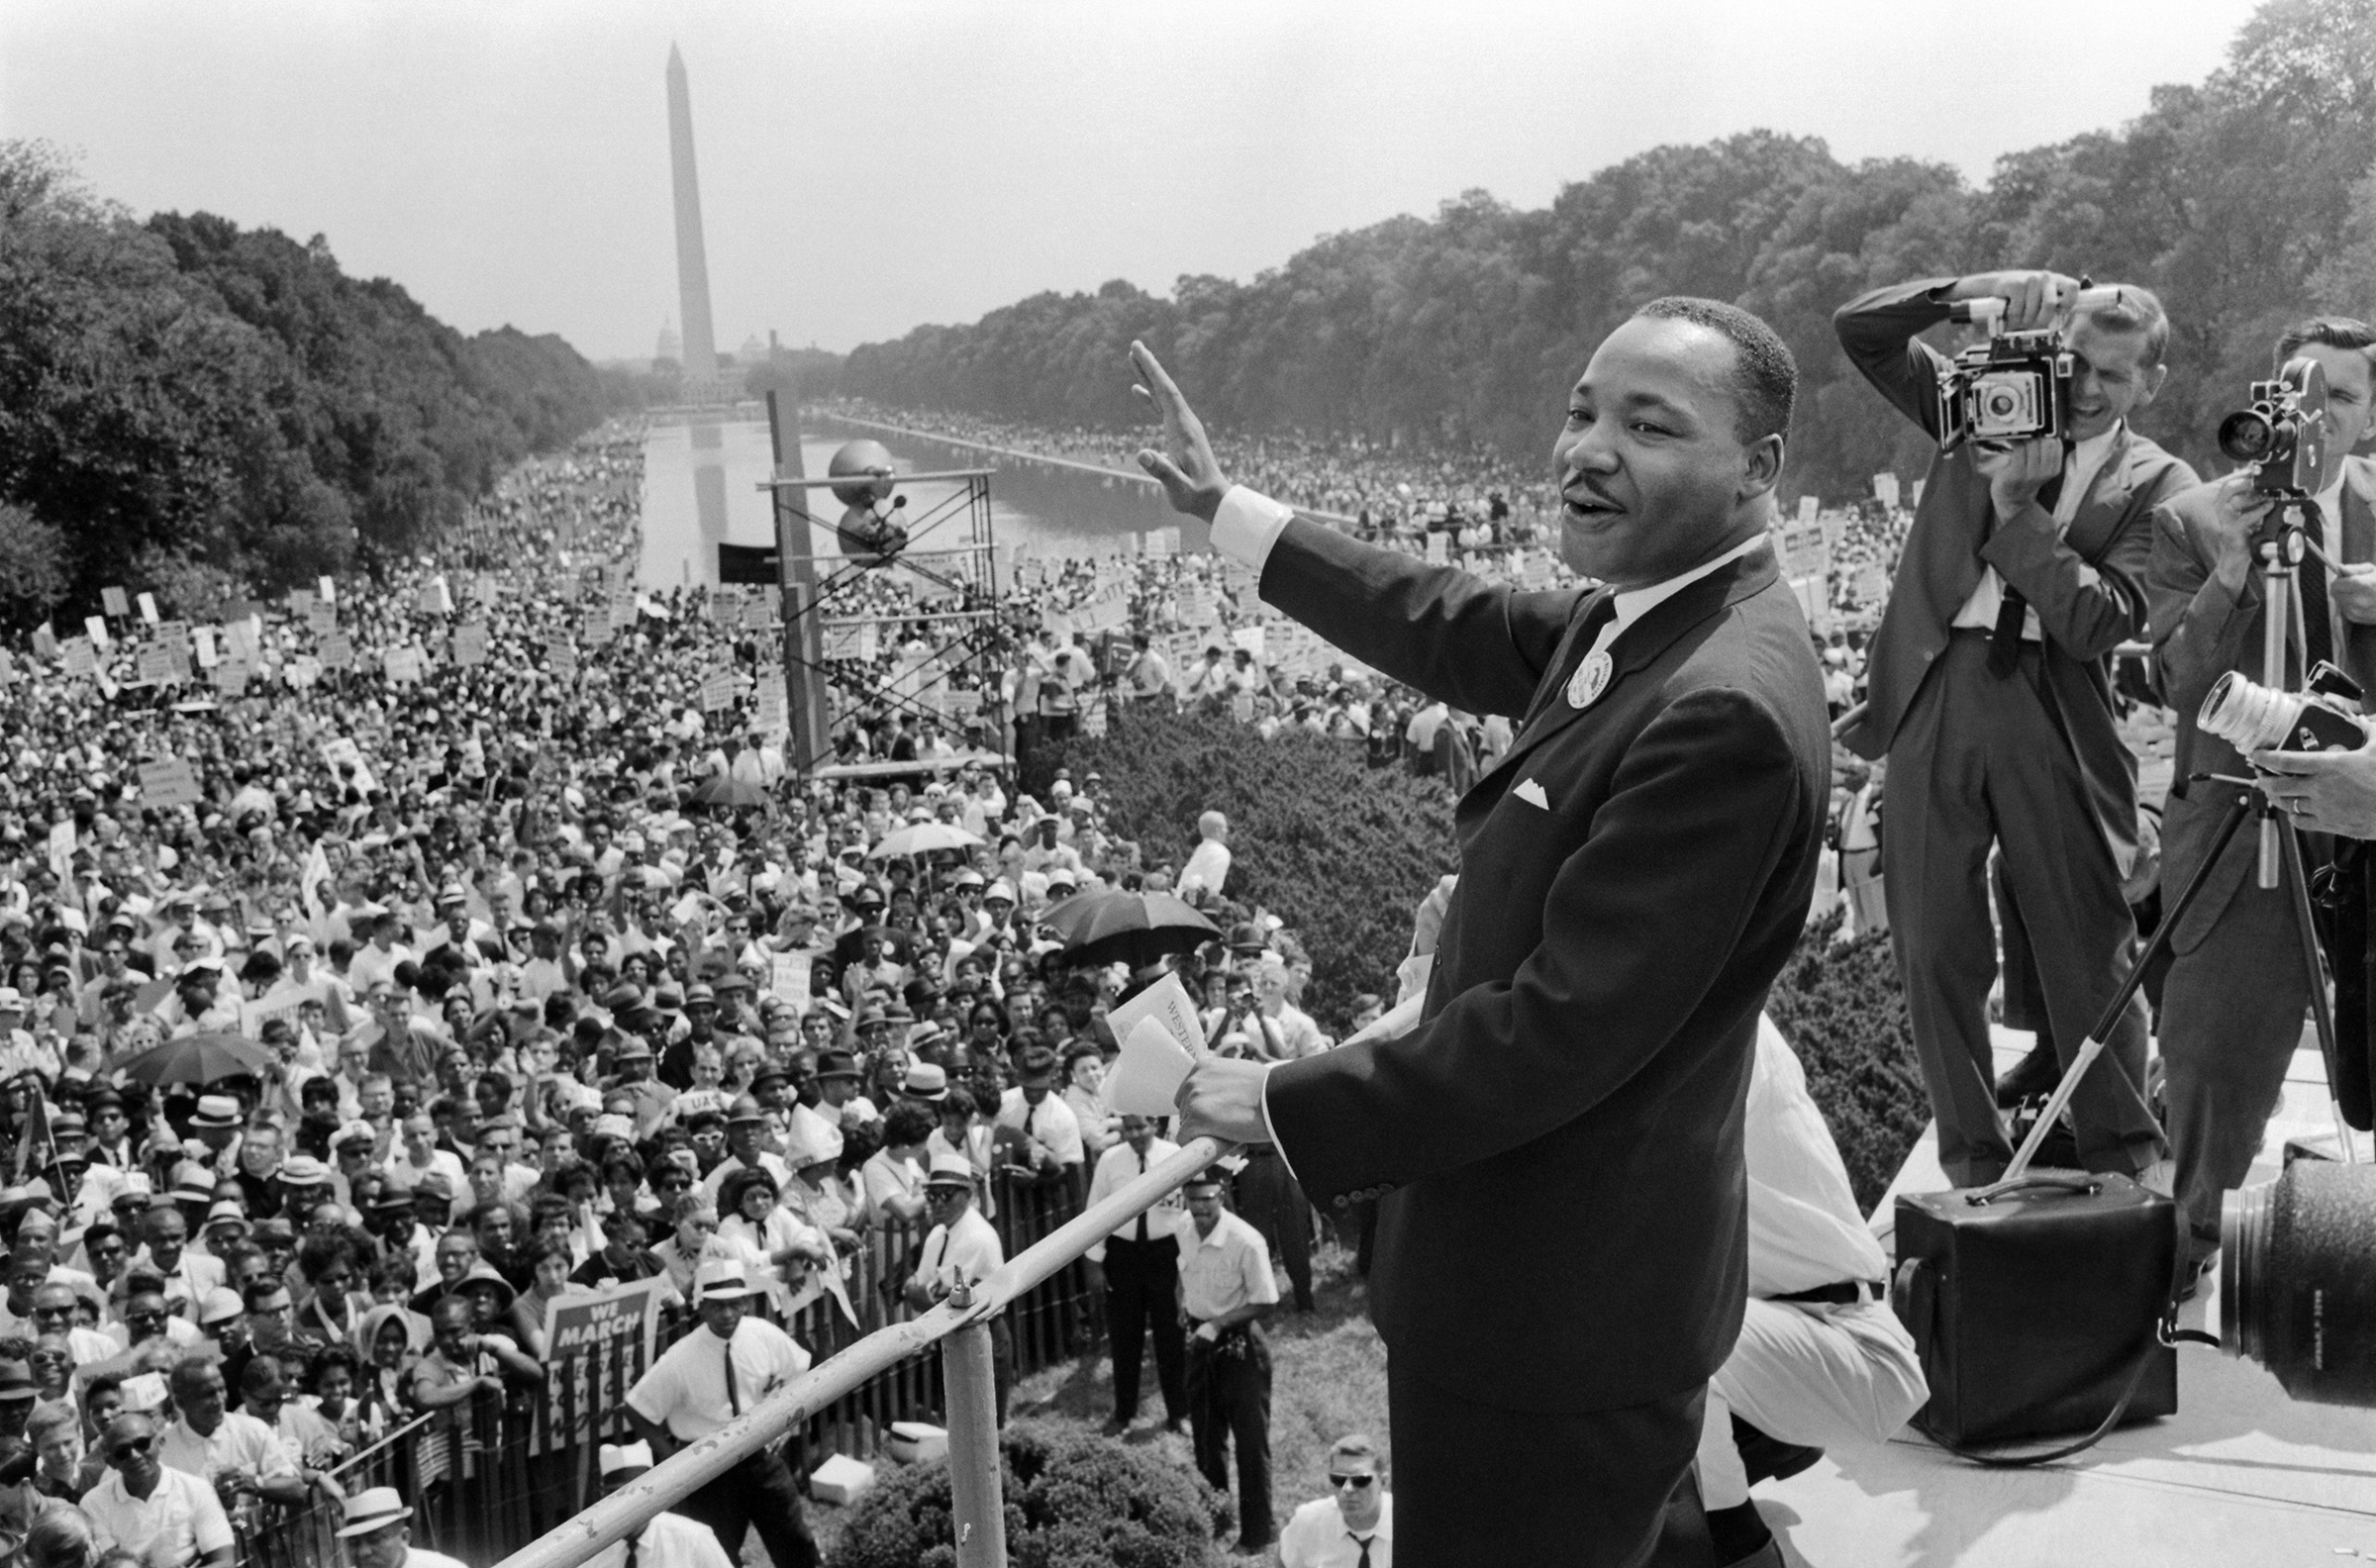 Dr. Martin Luther King Jr. waves to supporters on the Mall in Washington, D.C., where he delivered his "I Have A Dream" speech, on Aug. 28, 1963. (AFP/Getty Images)